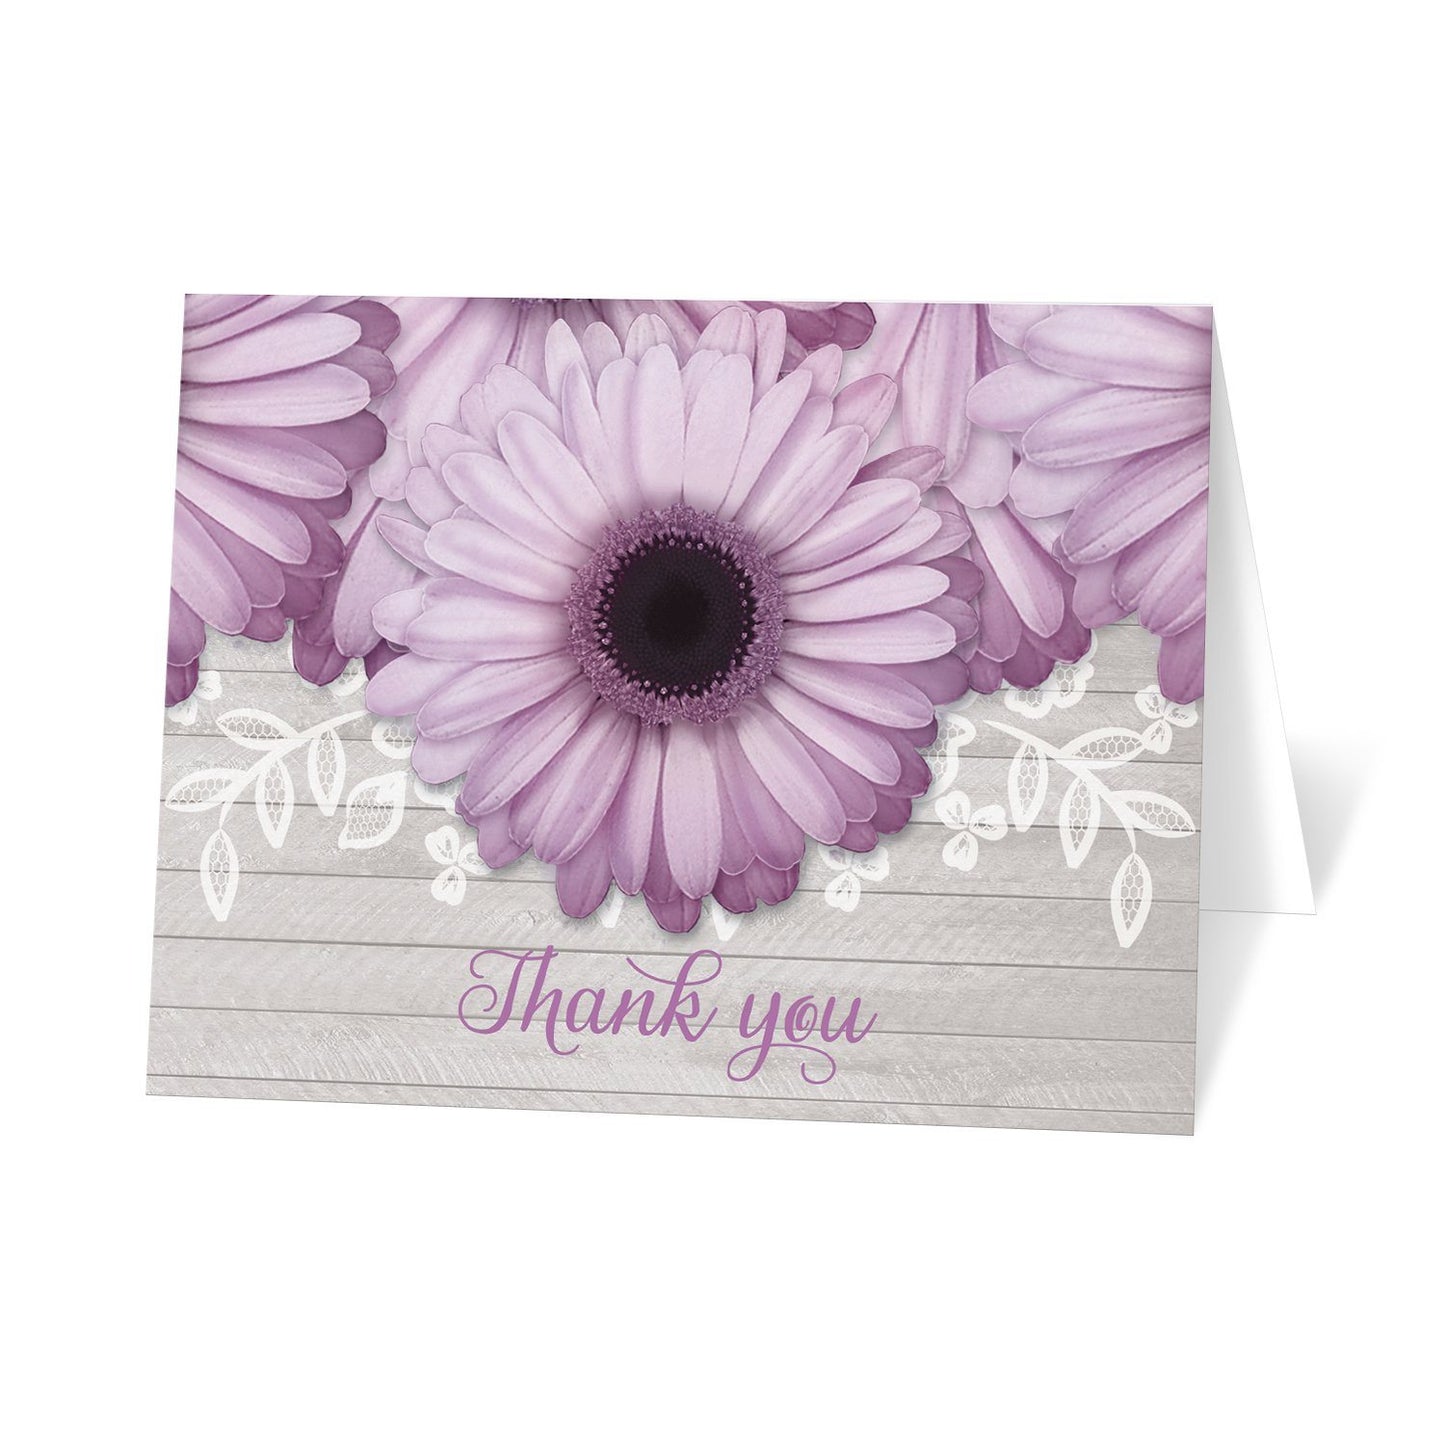 Rustic Purple Daisy Gray Wood Thank You Cards at Artistically Invited